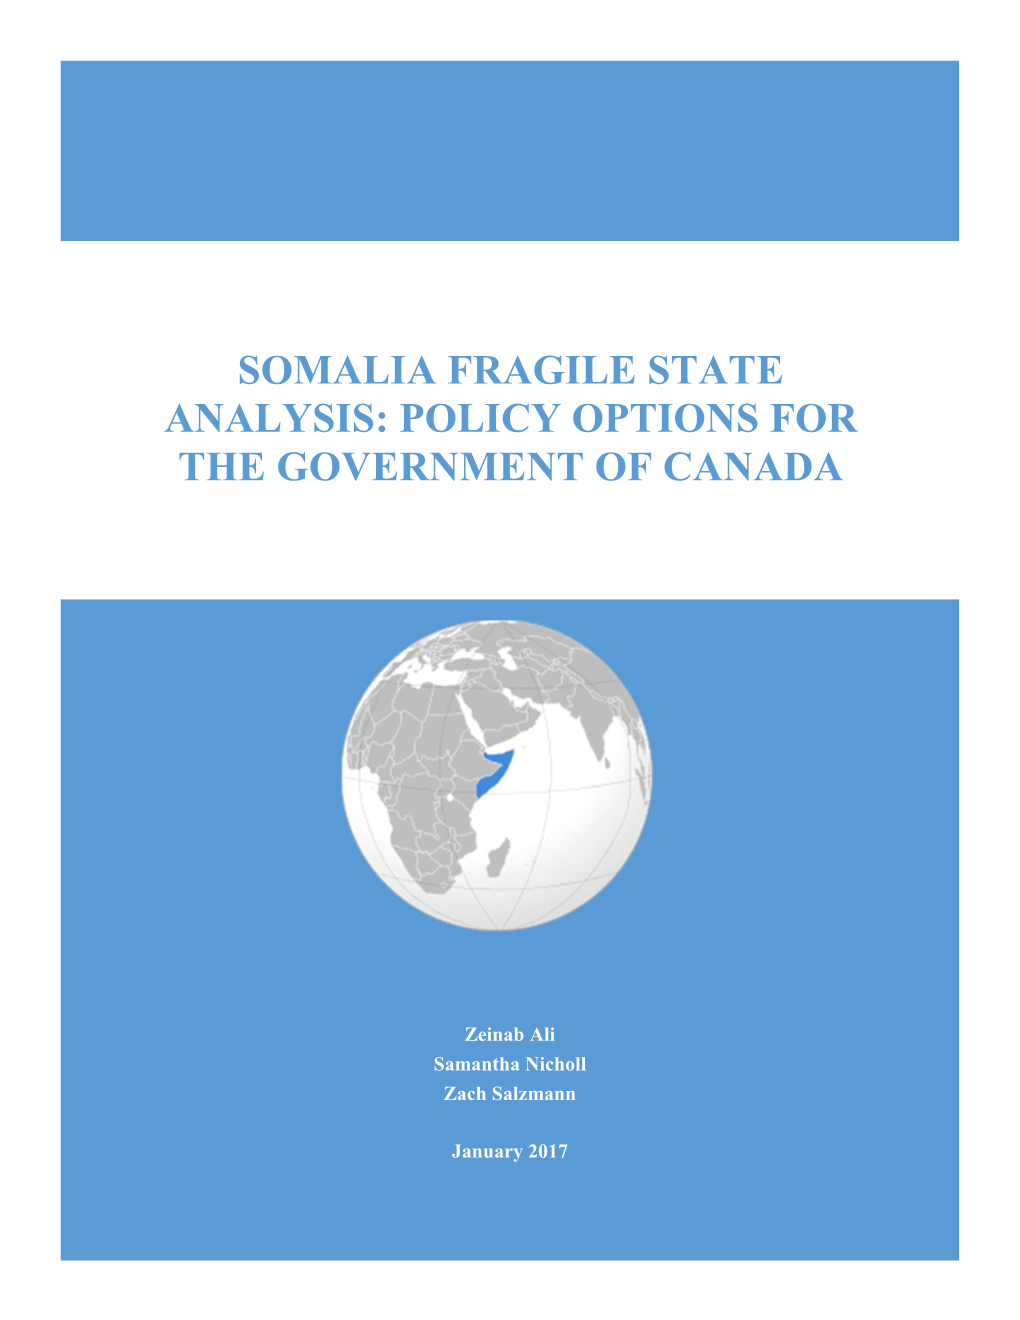 Somalia Fragile State Analysis: Policy Options for the Government of Canada